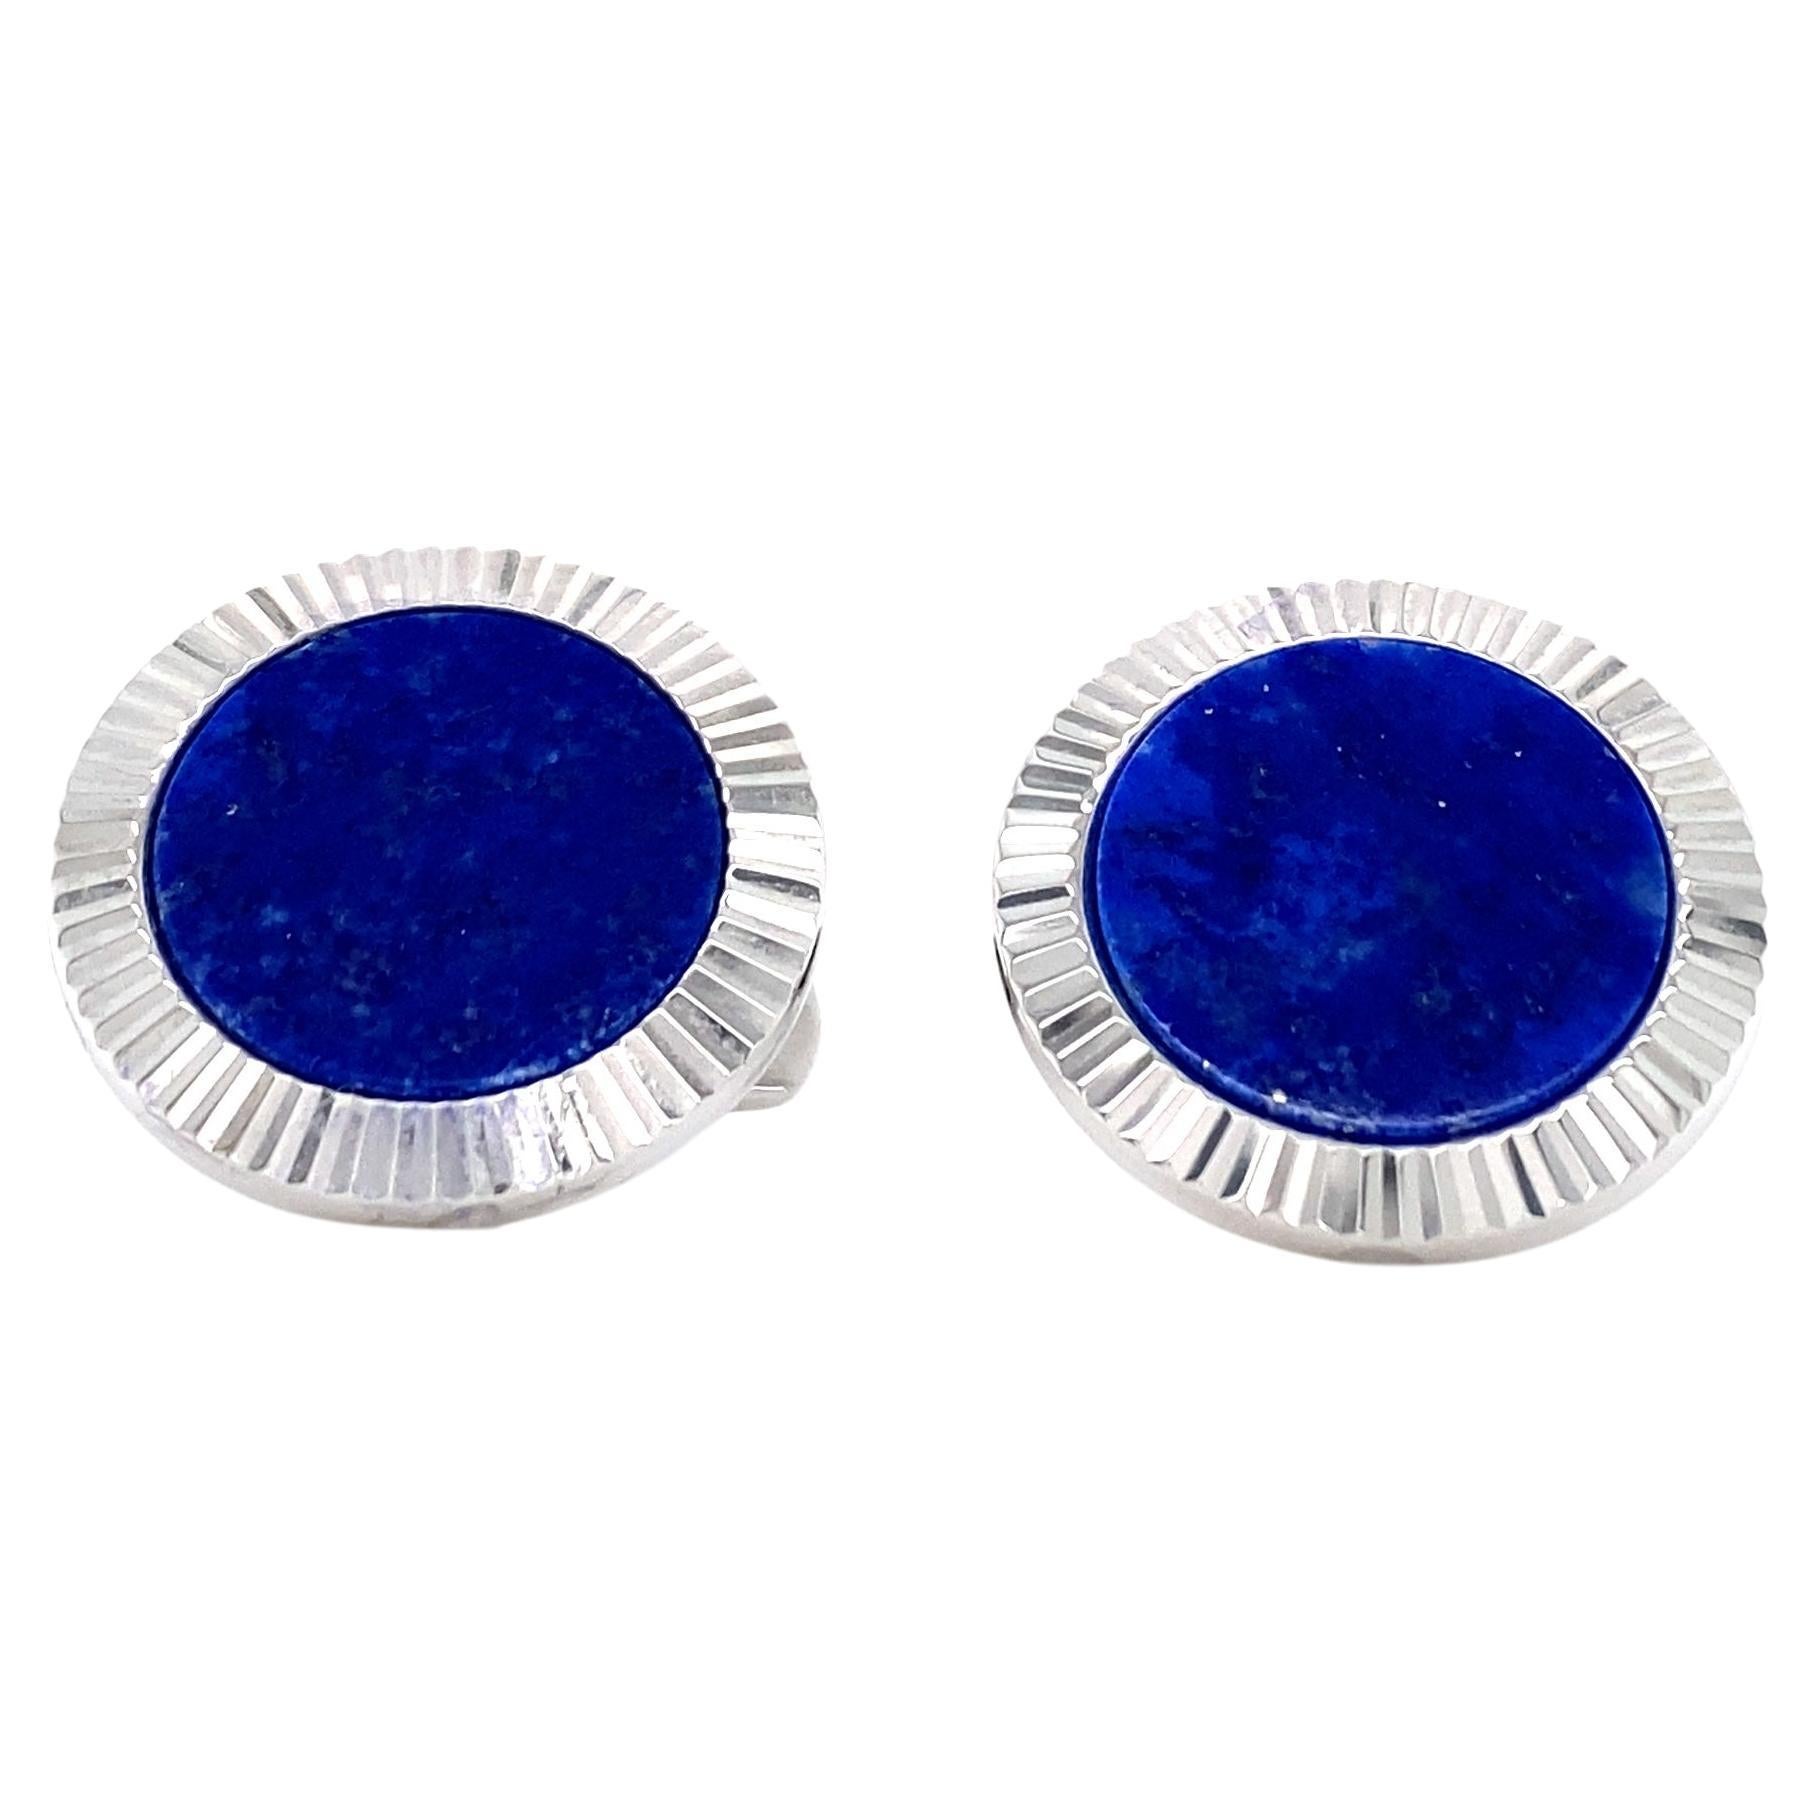 Fluted Round Lapis Lazuli Cufflinks in Solid 925 Sterling Silver, Rhodium Plated For Sale